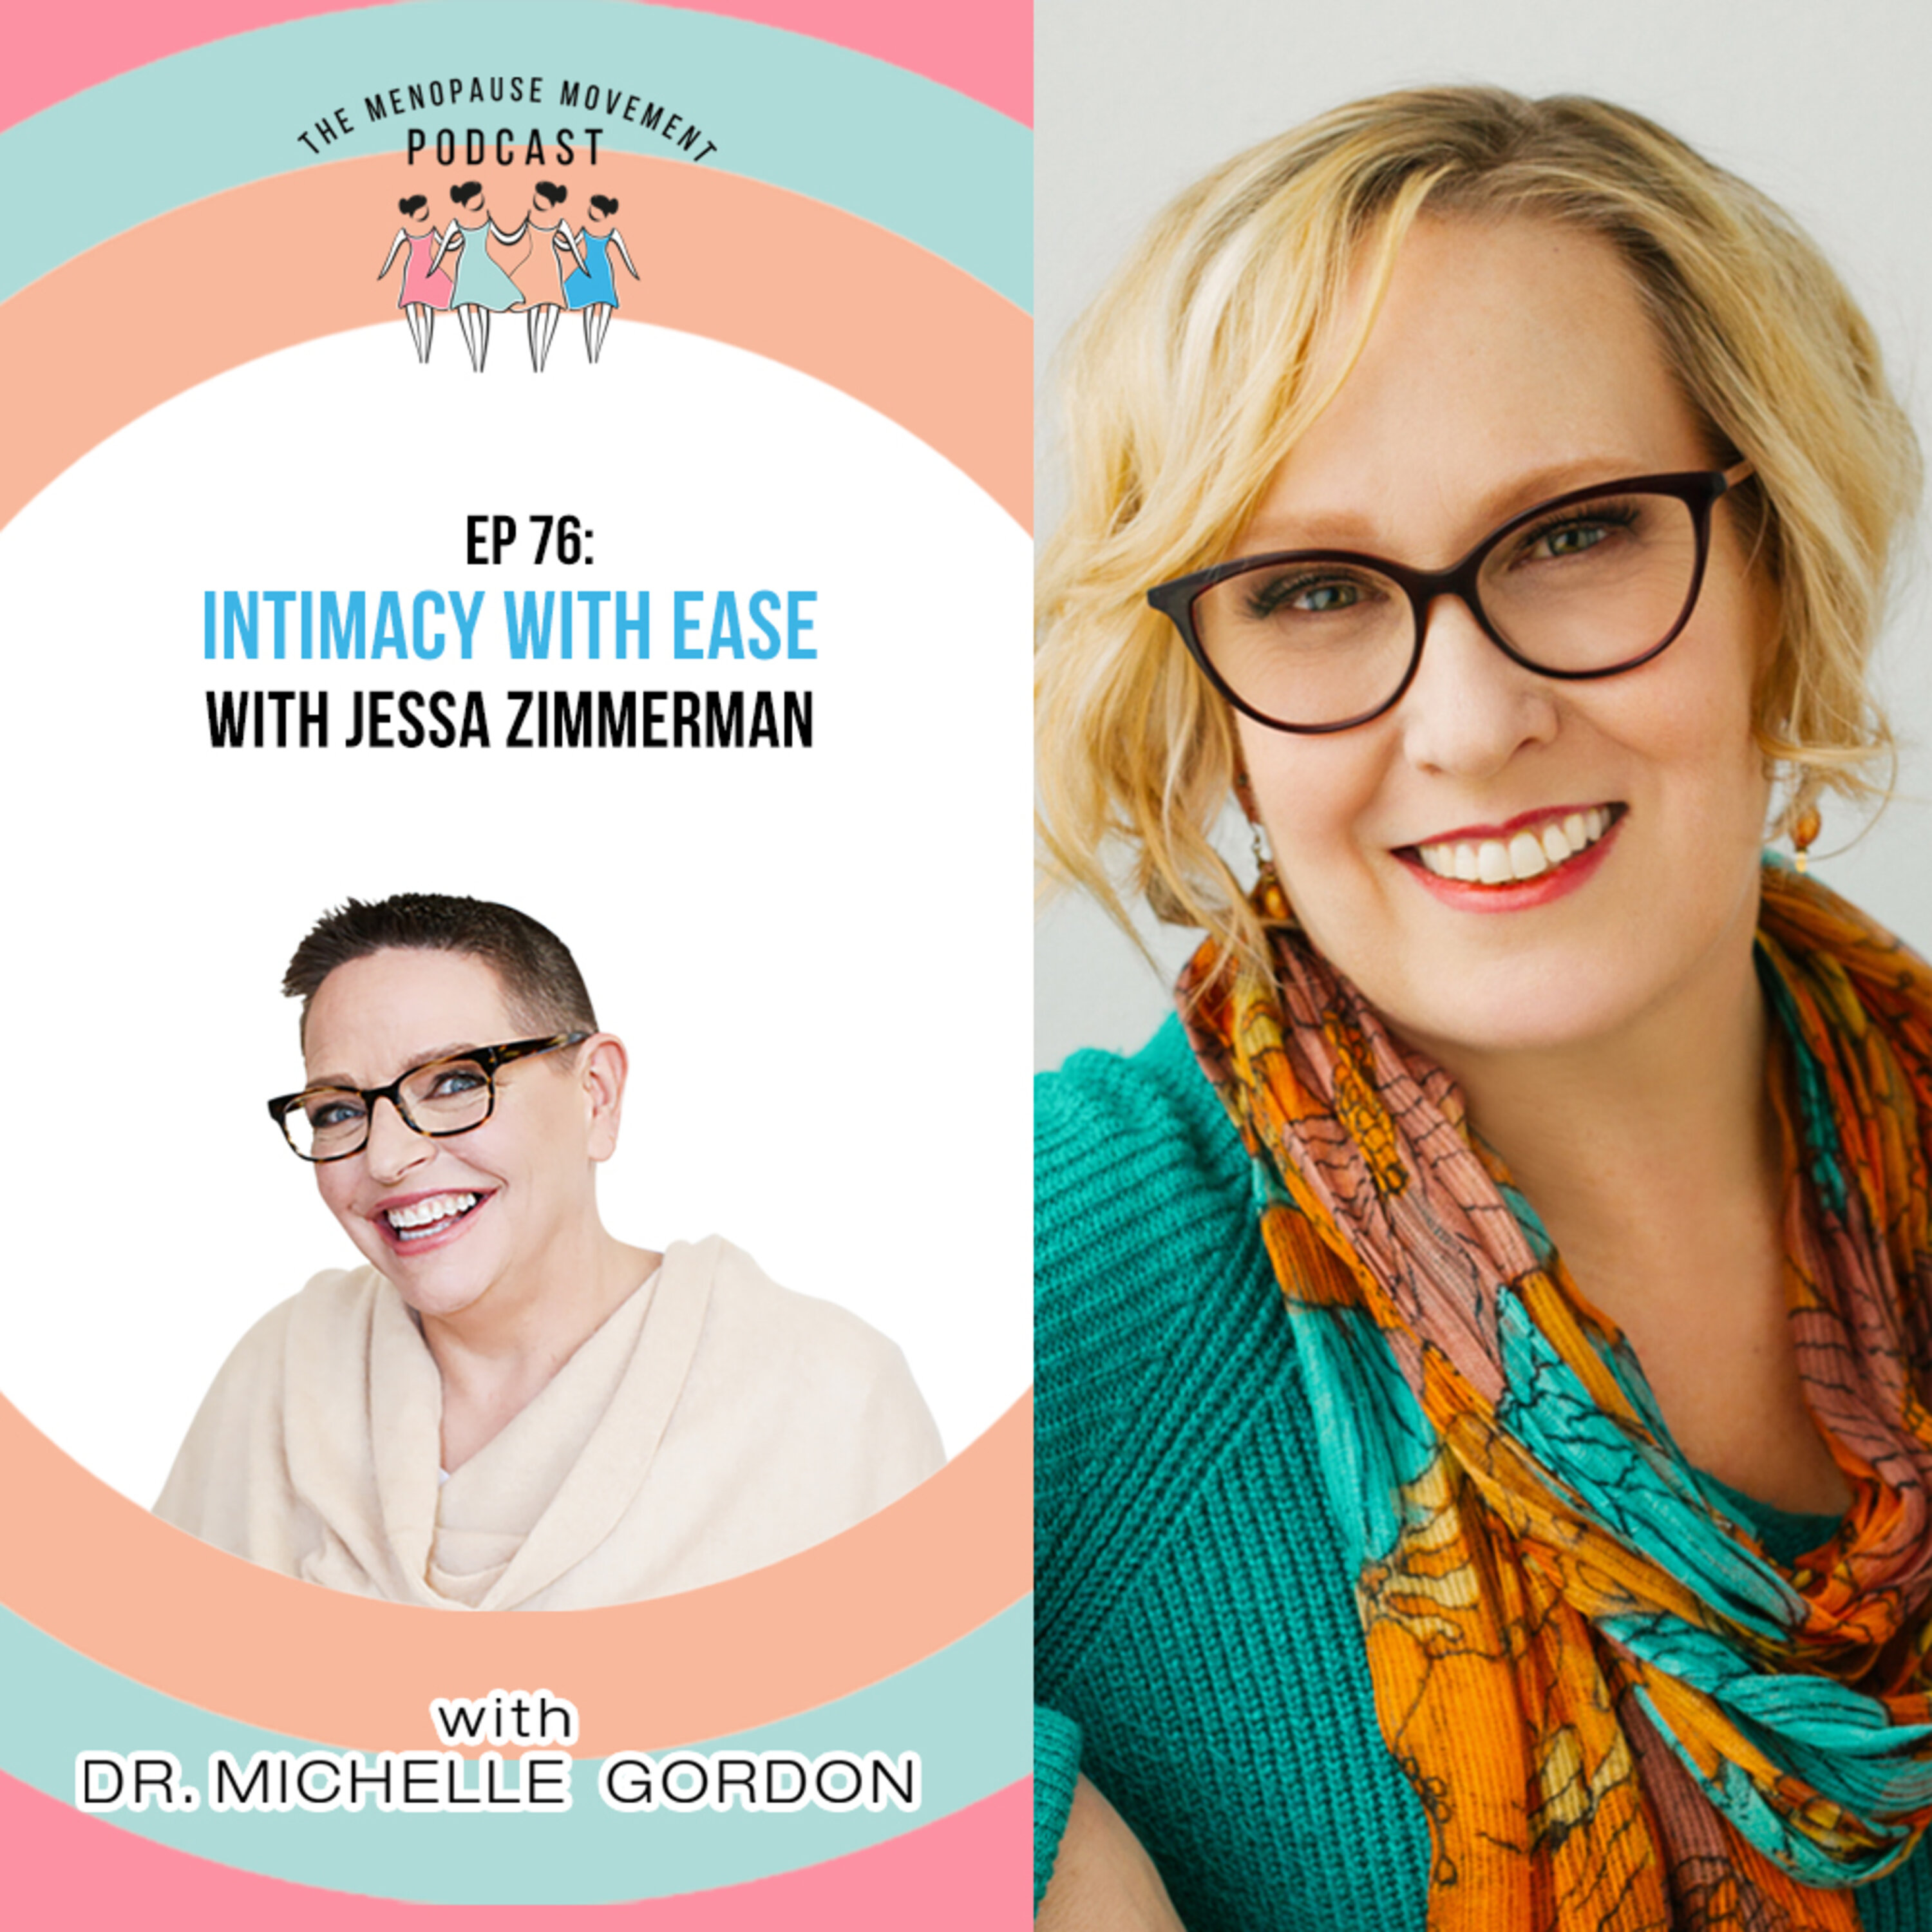 Intimacy With Ease The Menopause Movement Podcast